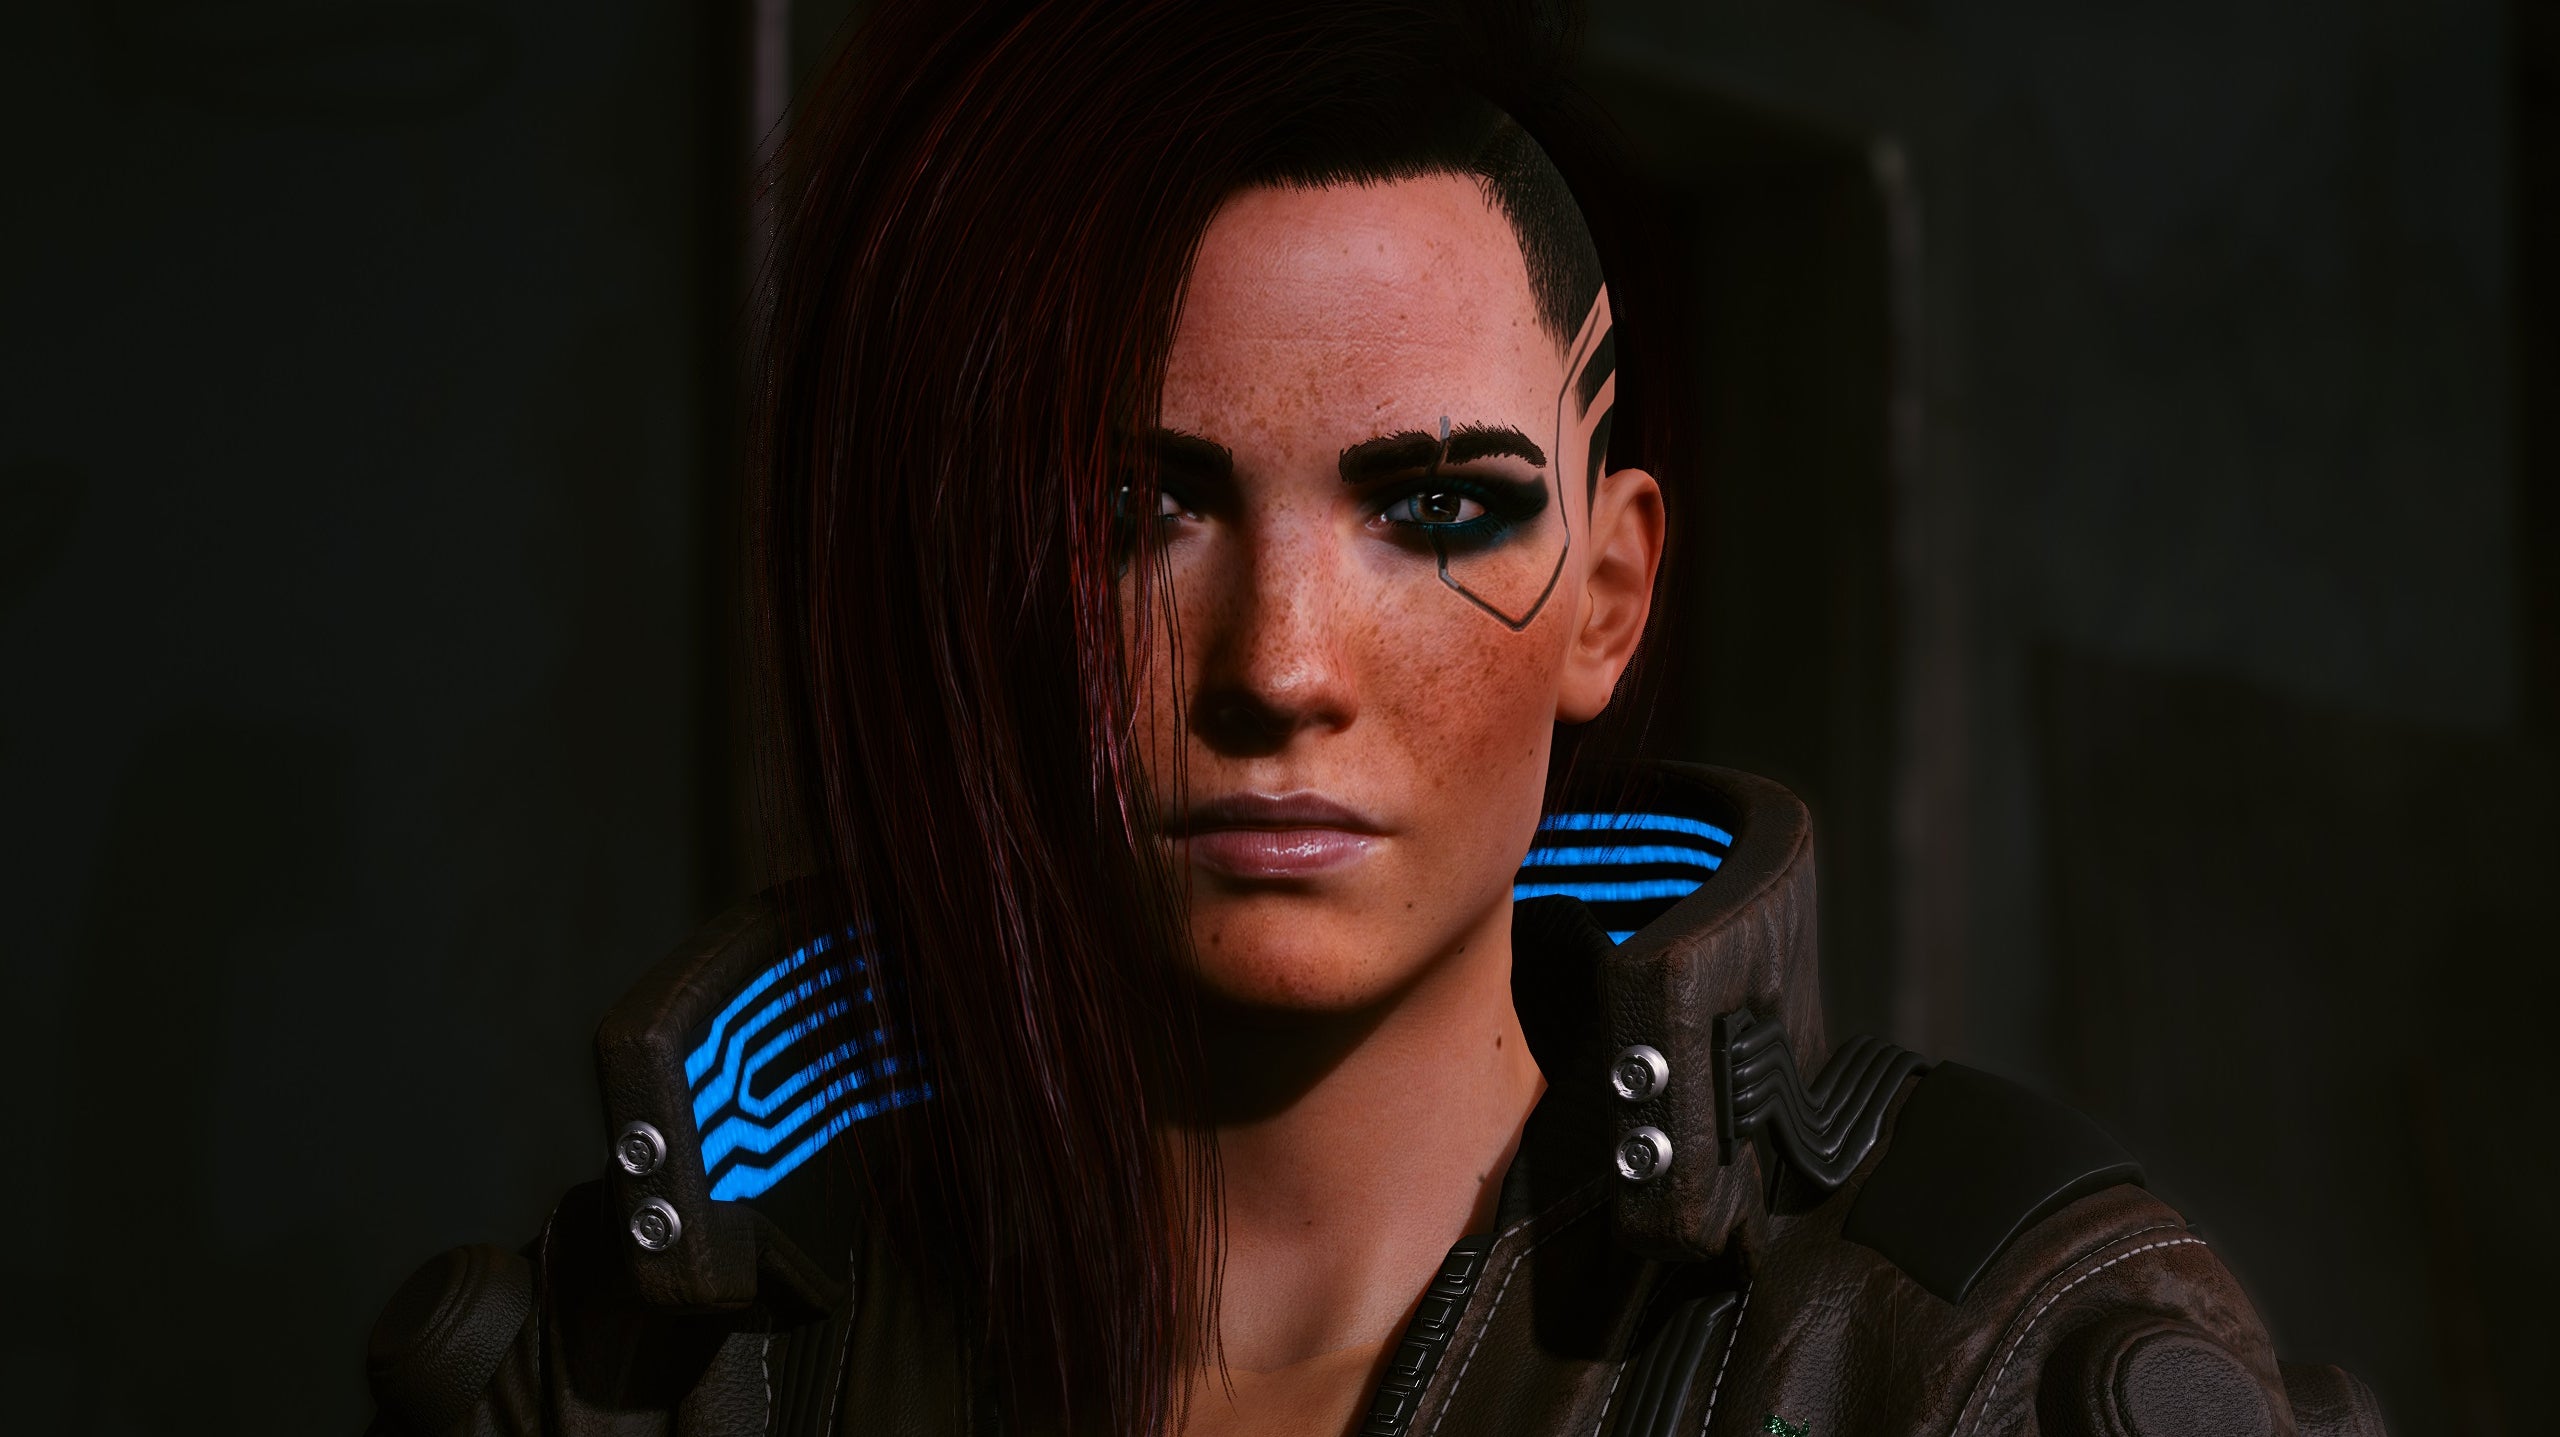 Image for How to change your appearance in Cyberpunk 2077